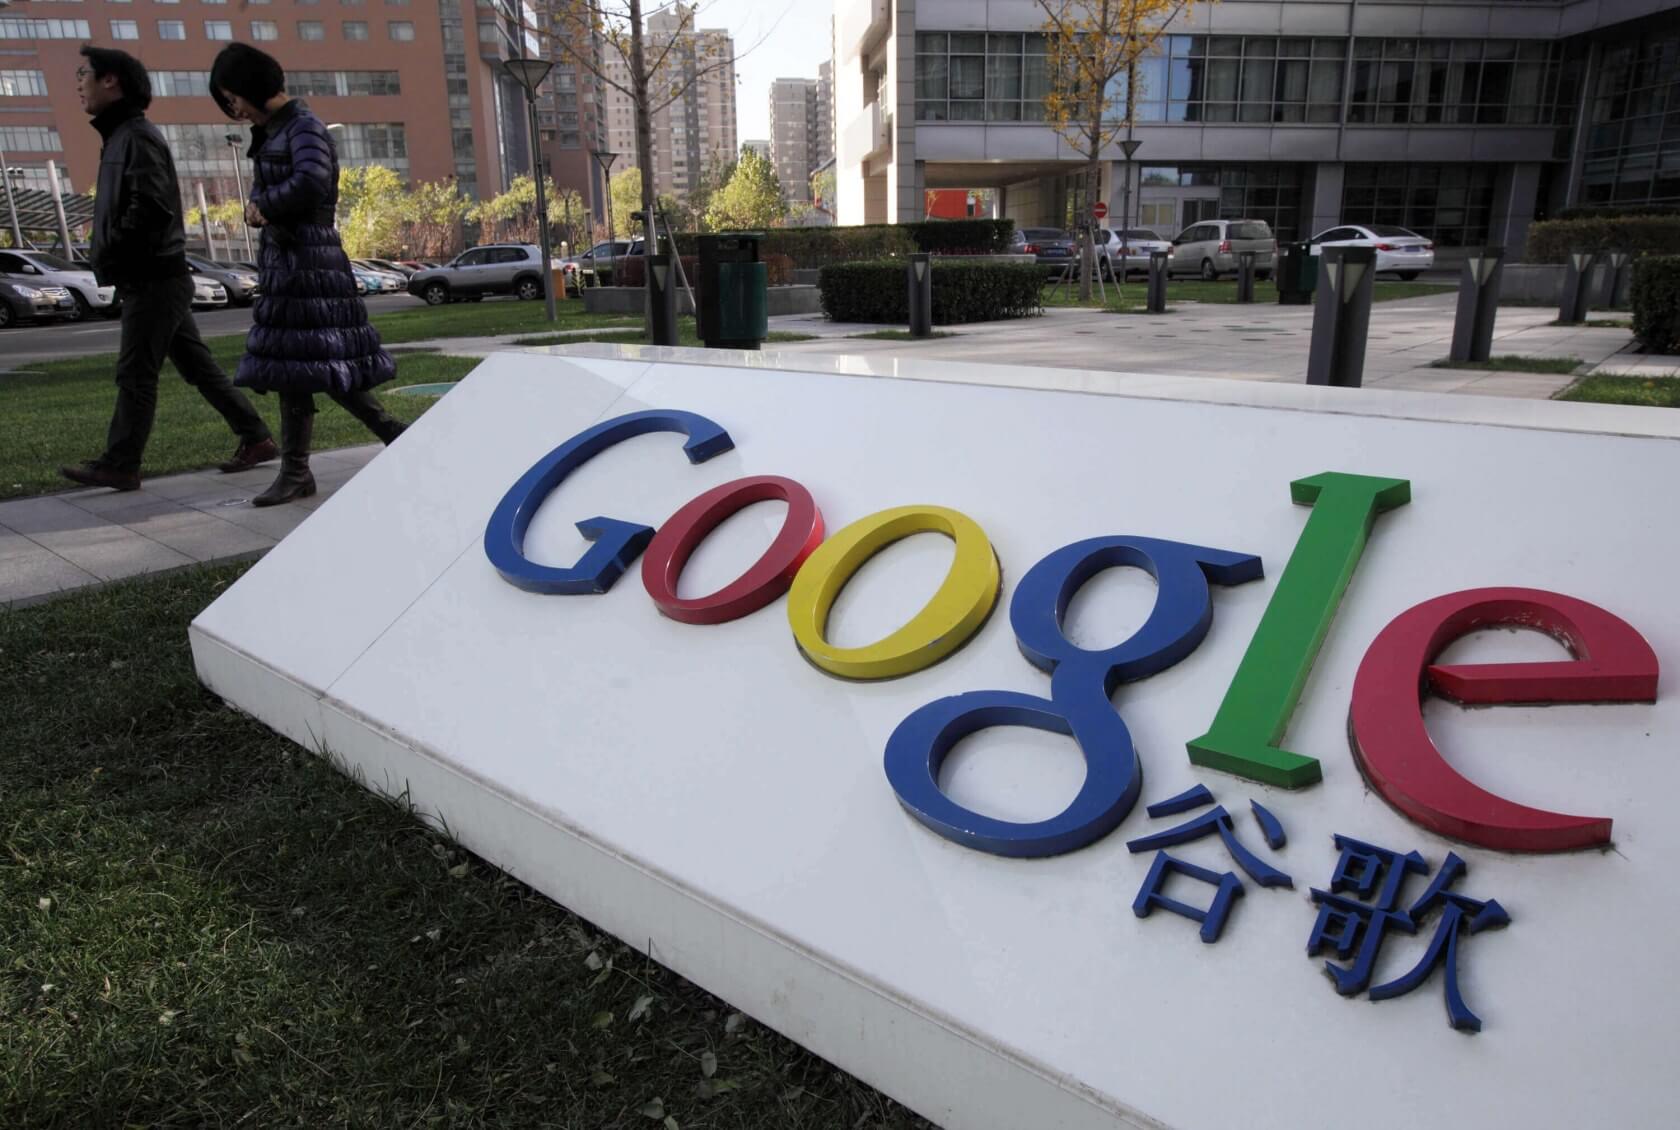 Google Translate has been shuttered in China over alleged low usage